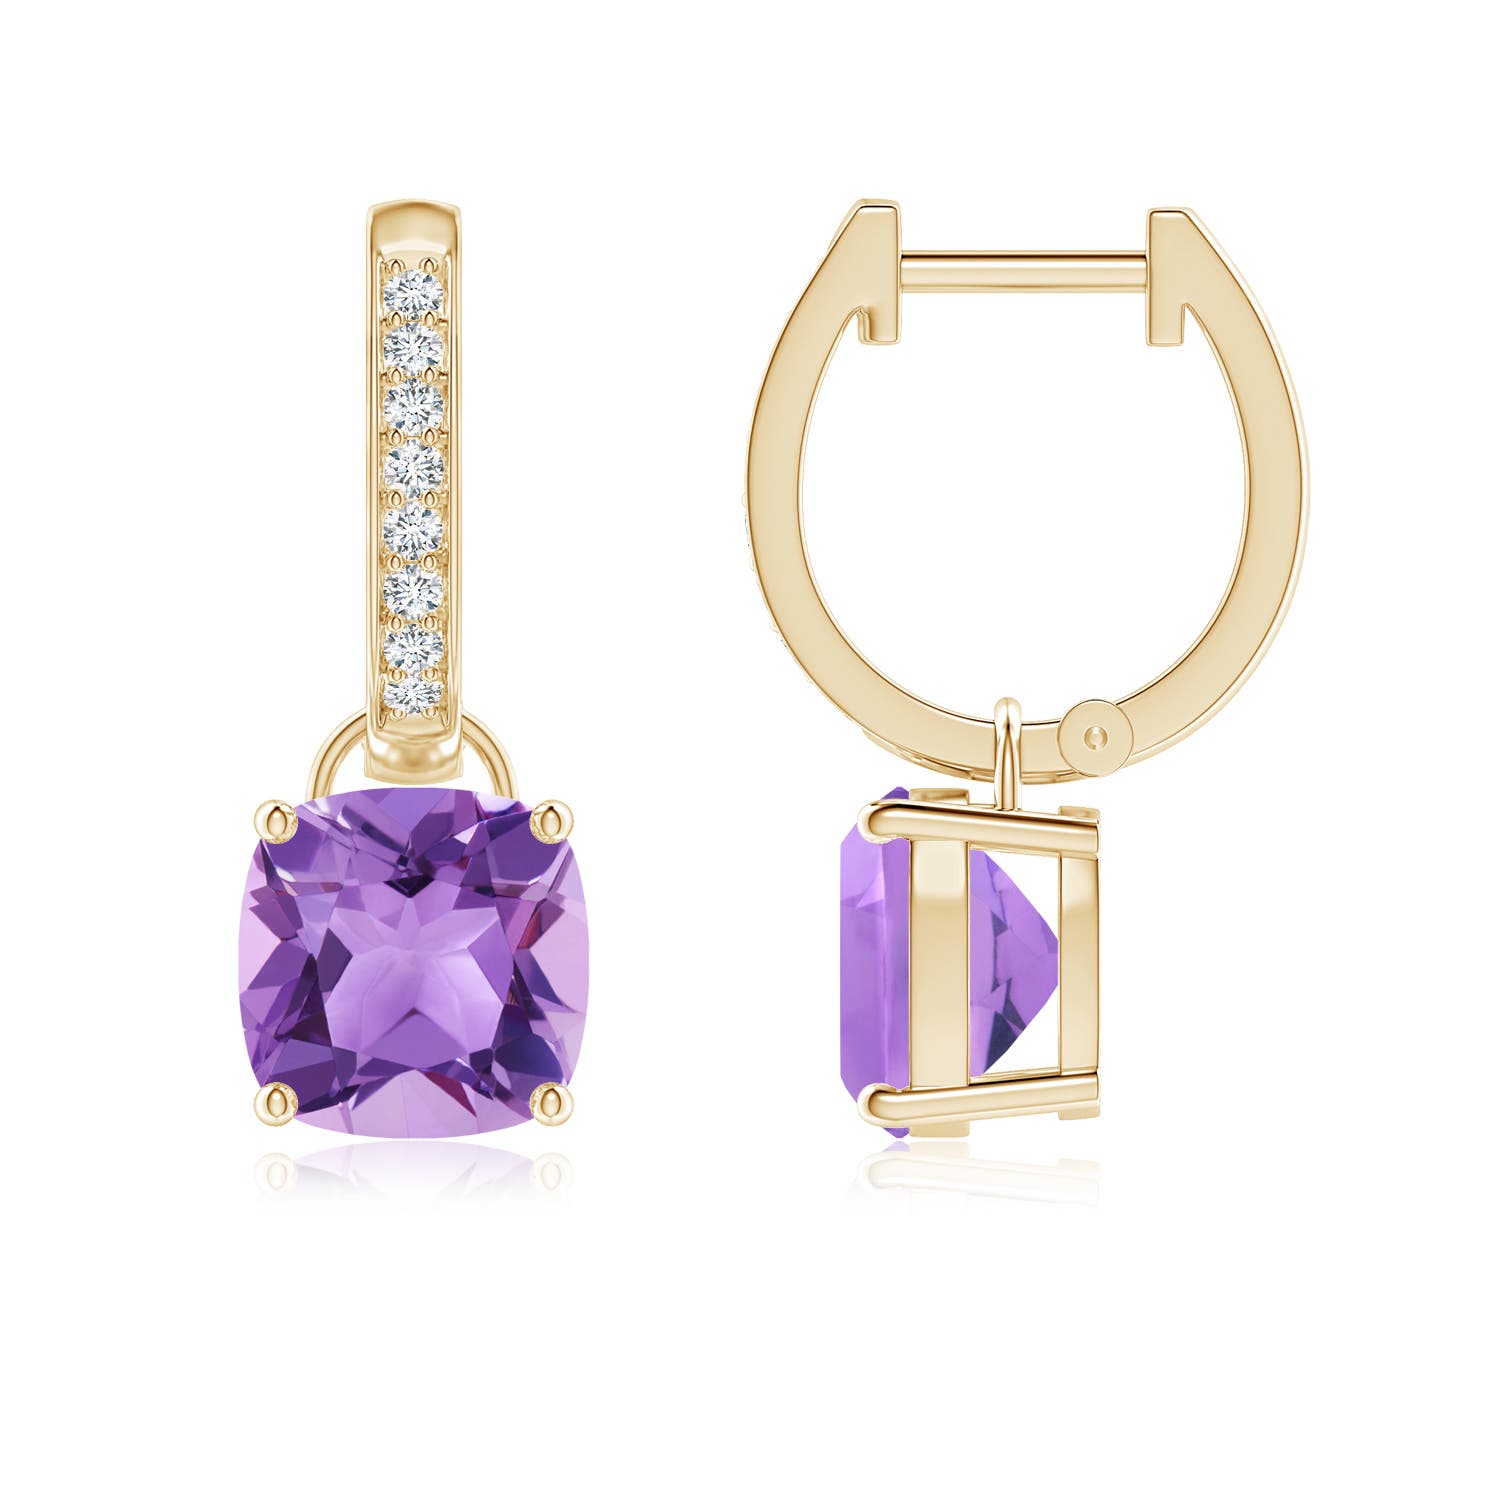 A - Amethyst / 2.83 CT / 14 KT Yellow Gold